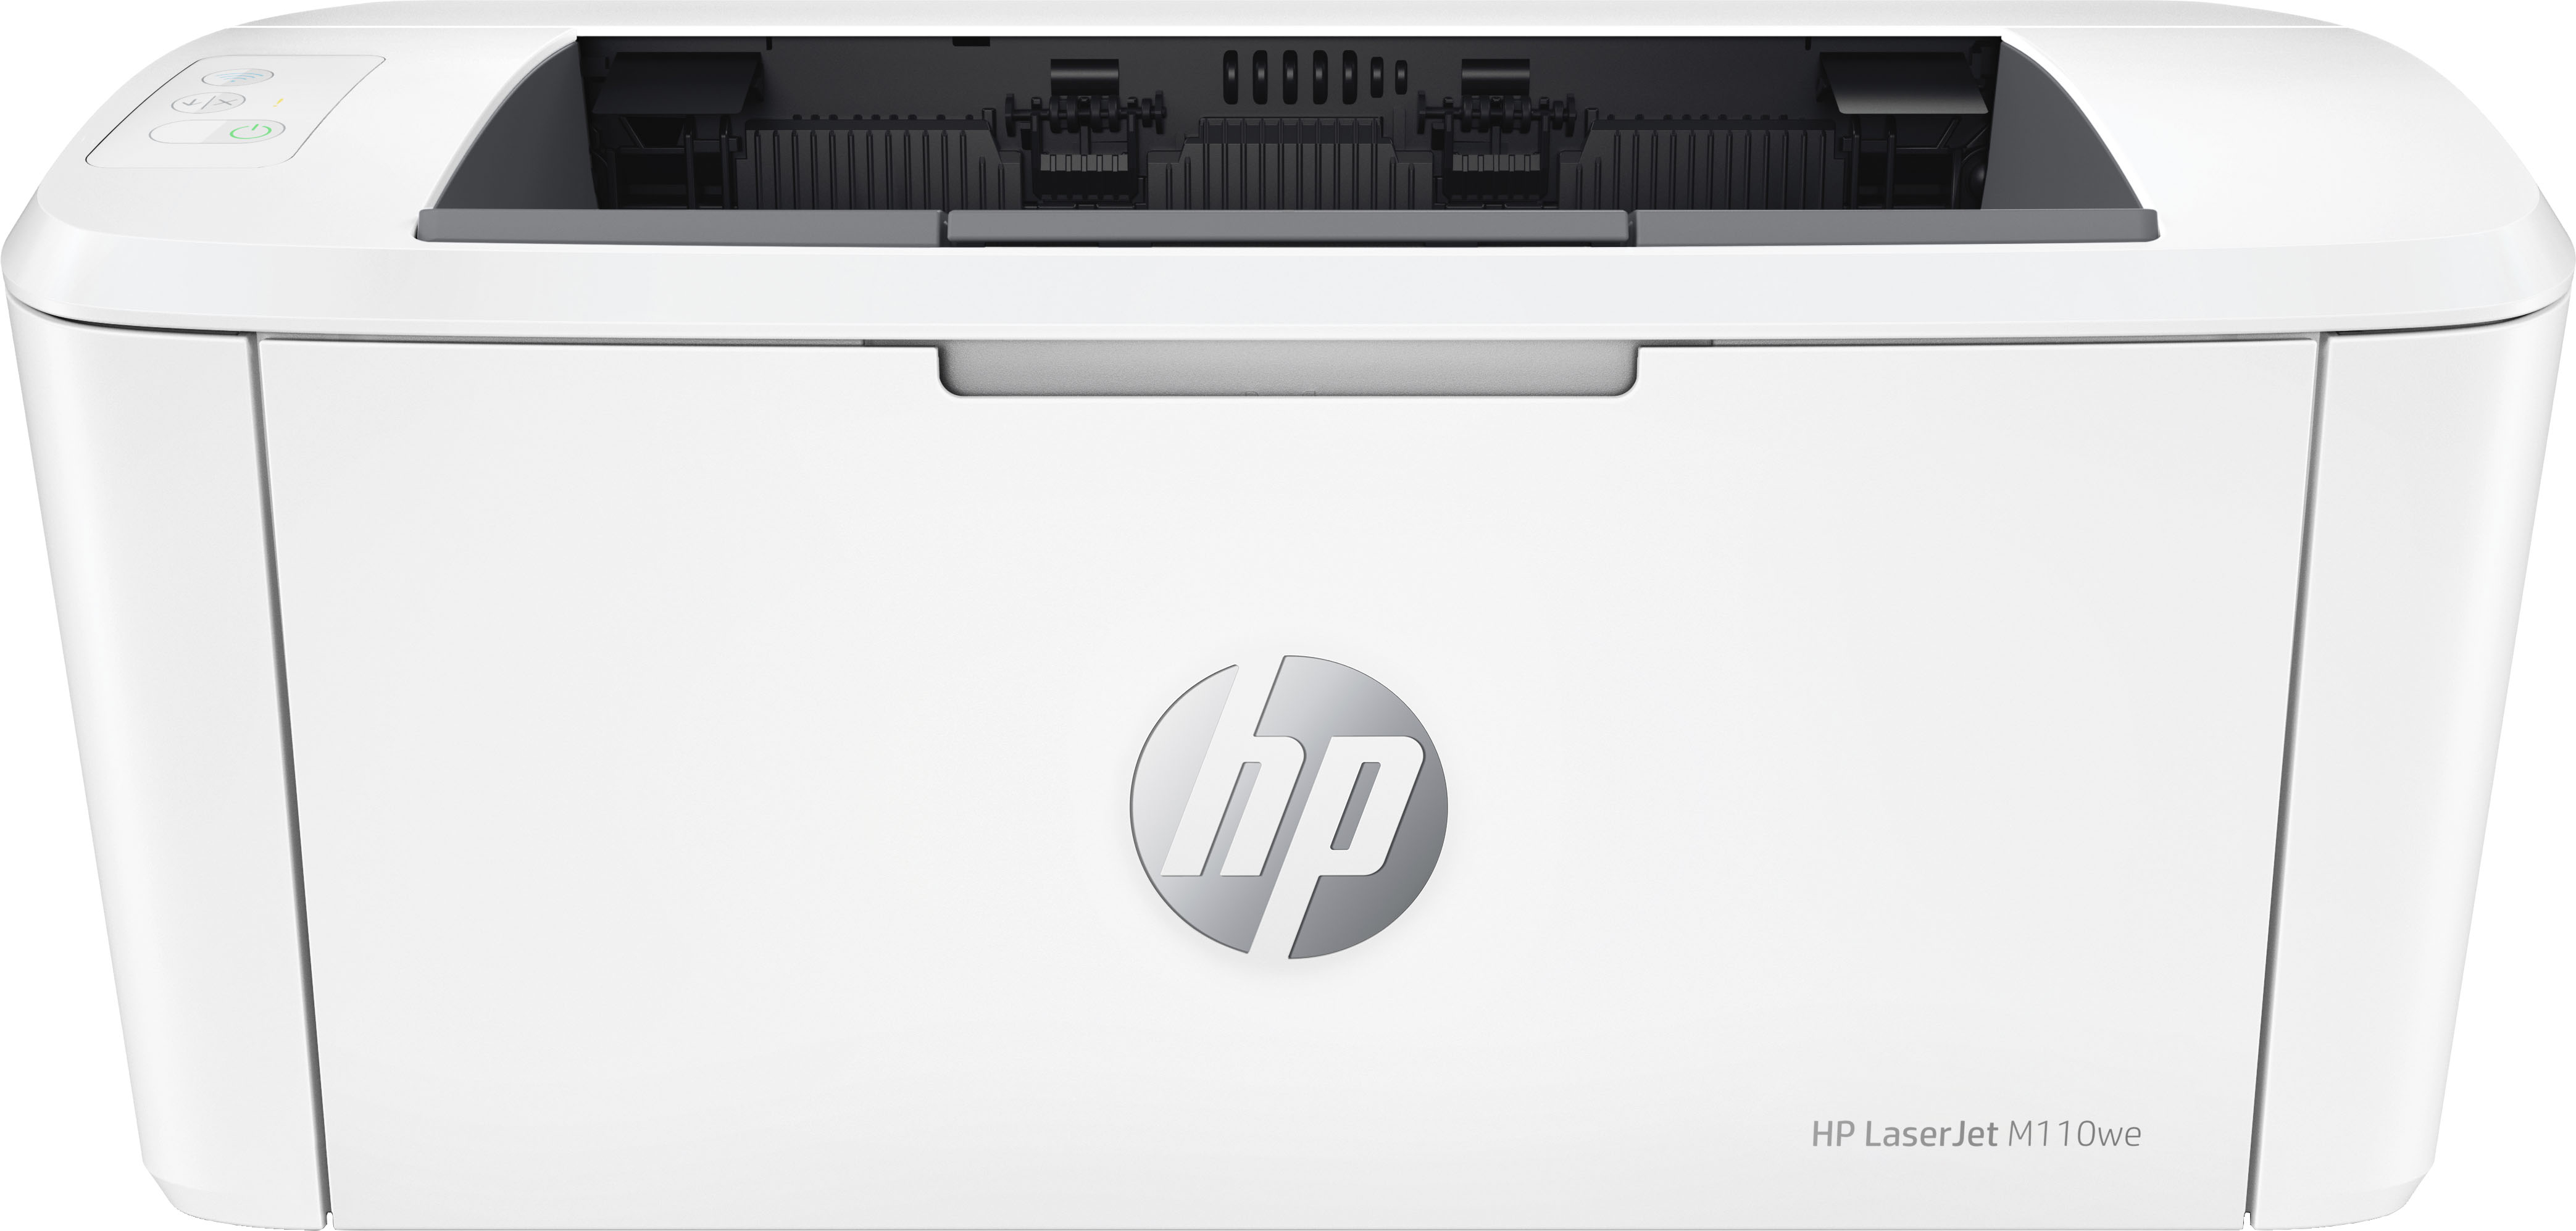 toewijzing spannend Kent HP LaserJet M110we Wireless Black and White Laser Printer with 6 months of  Instant Ink included with HP+ White LaserJet M110we - Best Buy